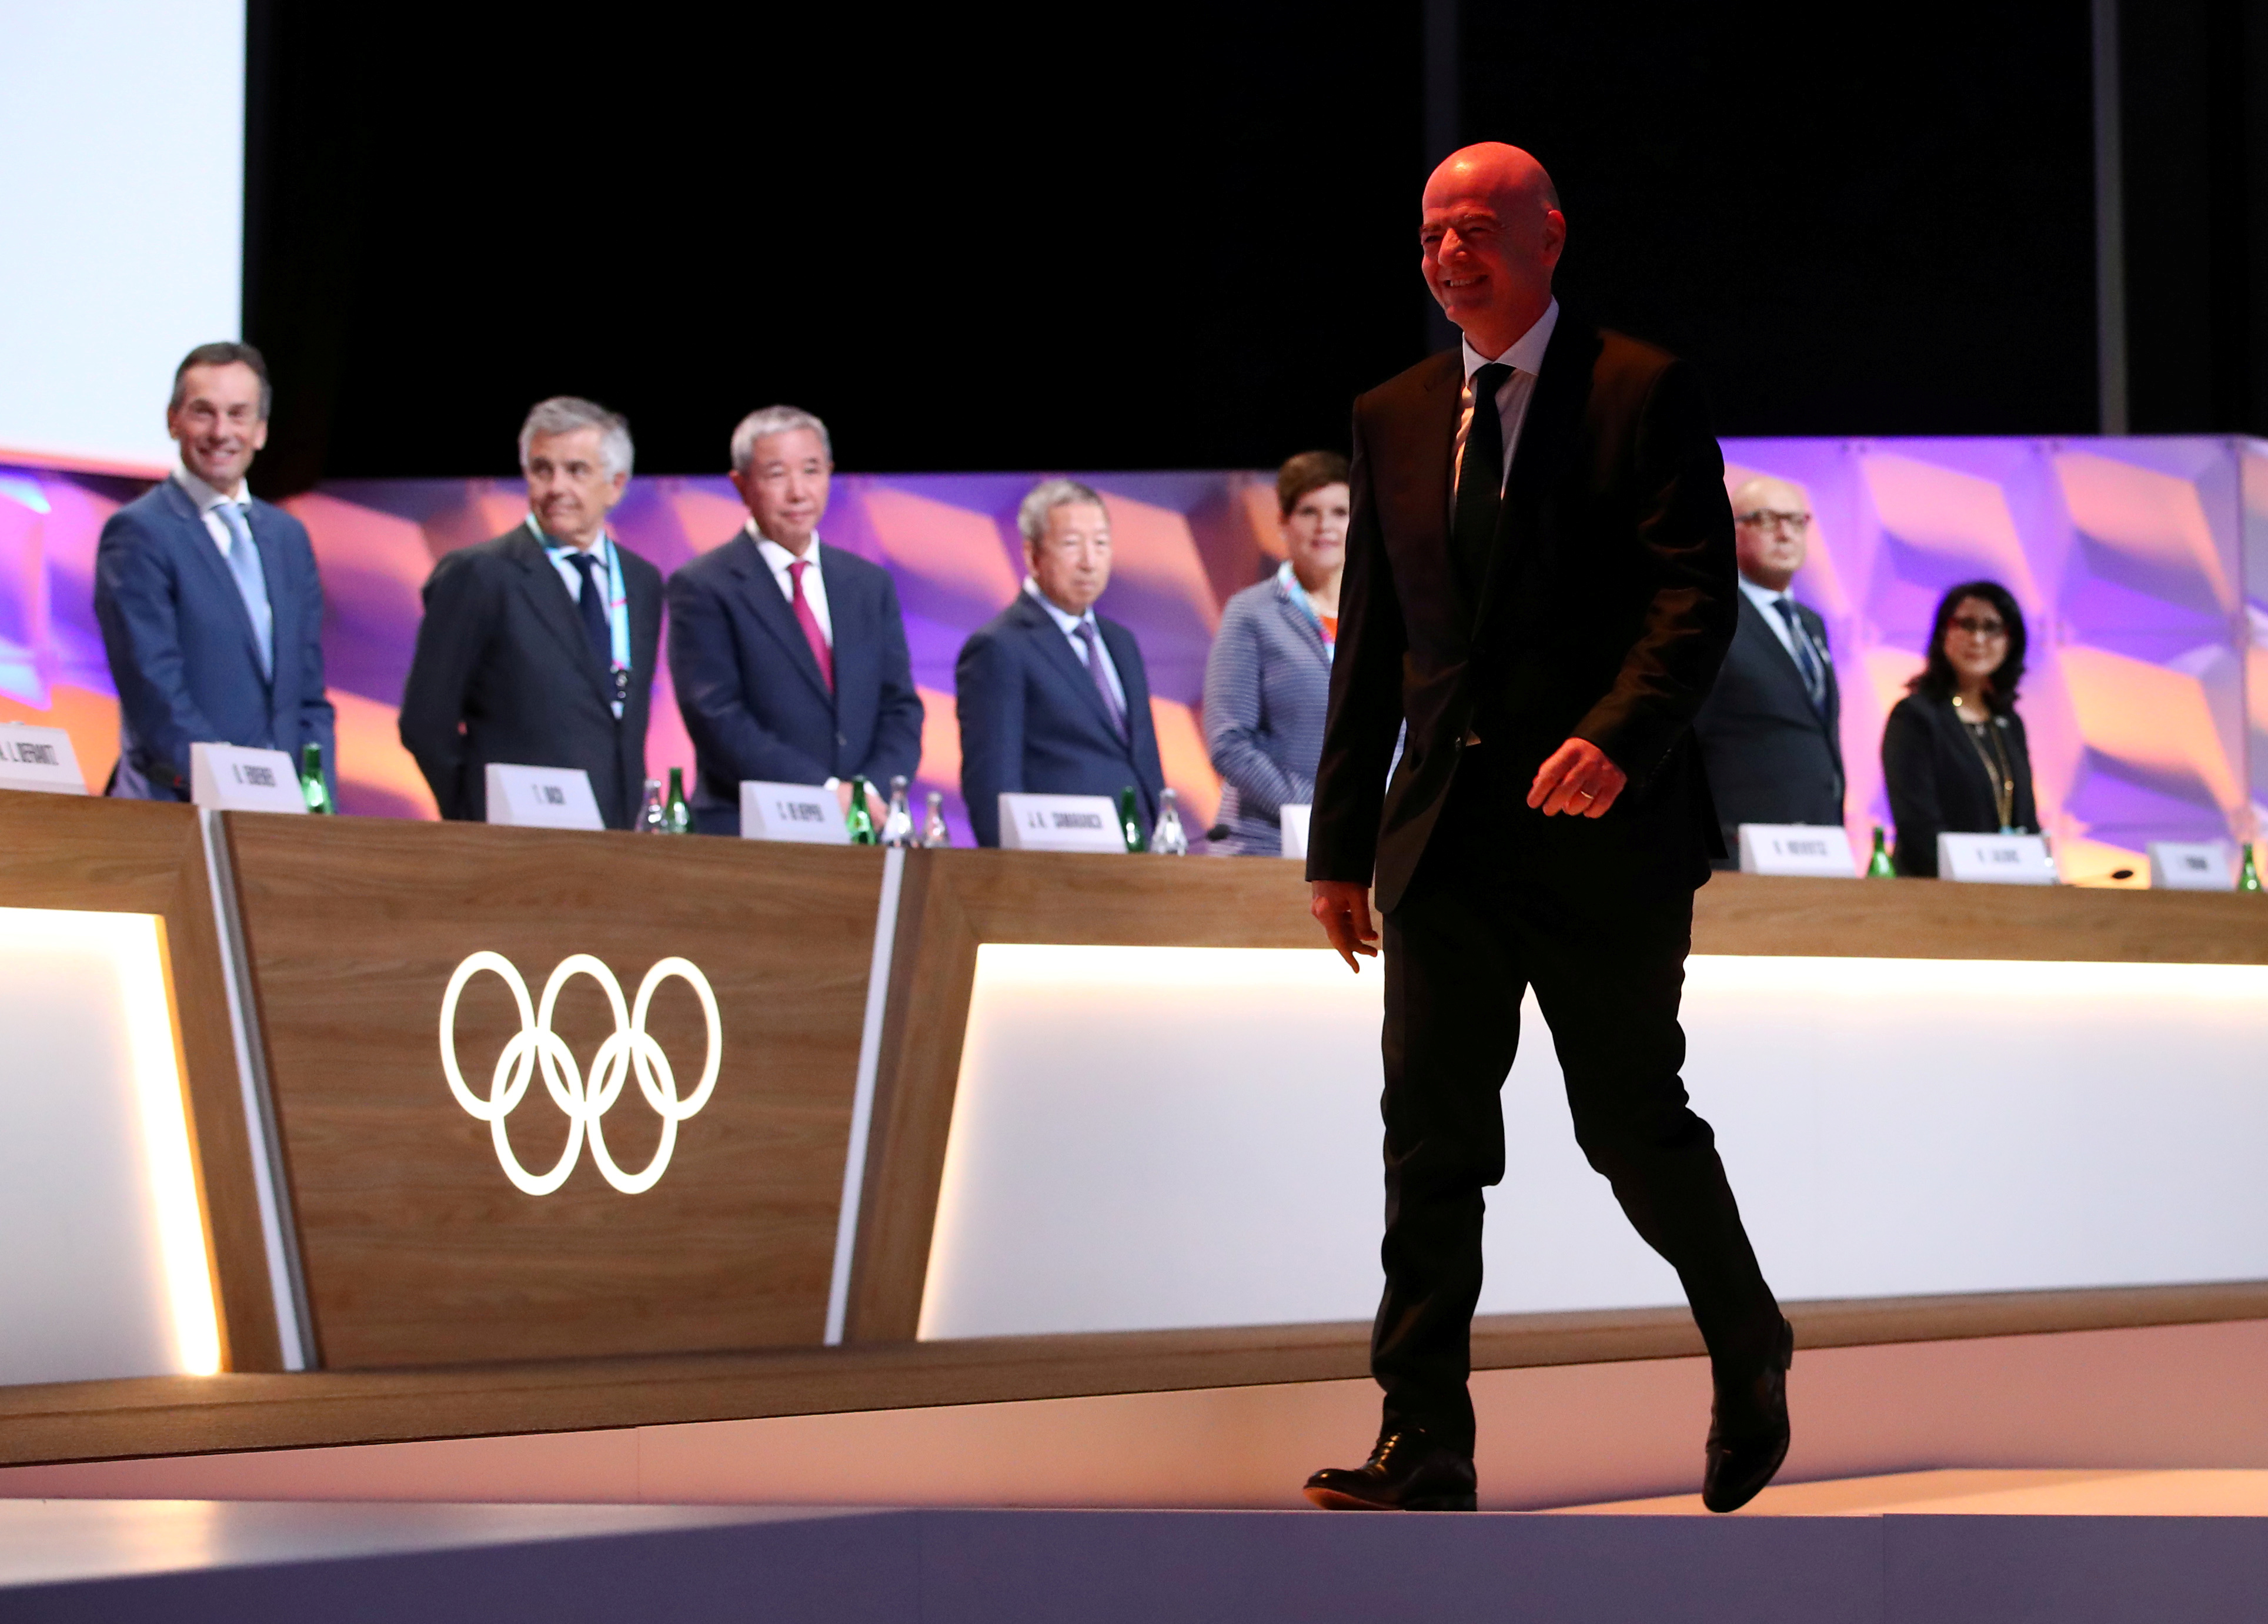 FILE PHOTO: FIFA president Gianni Infantino arrives to give oath after his election as International Olympic Committee (IOC) member during the 135th Session in Lausanne, Switzerland, January 10, 2020.  REUTERS/Denis Balibouse/File Photo